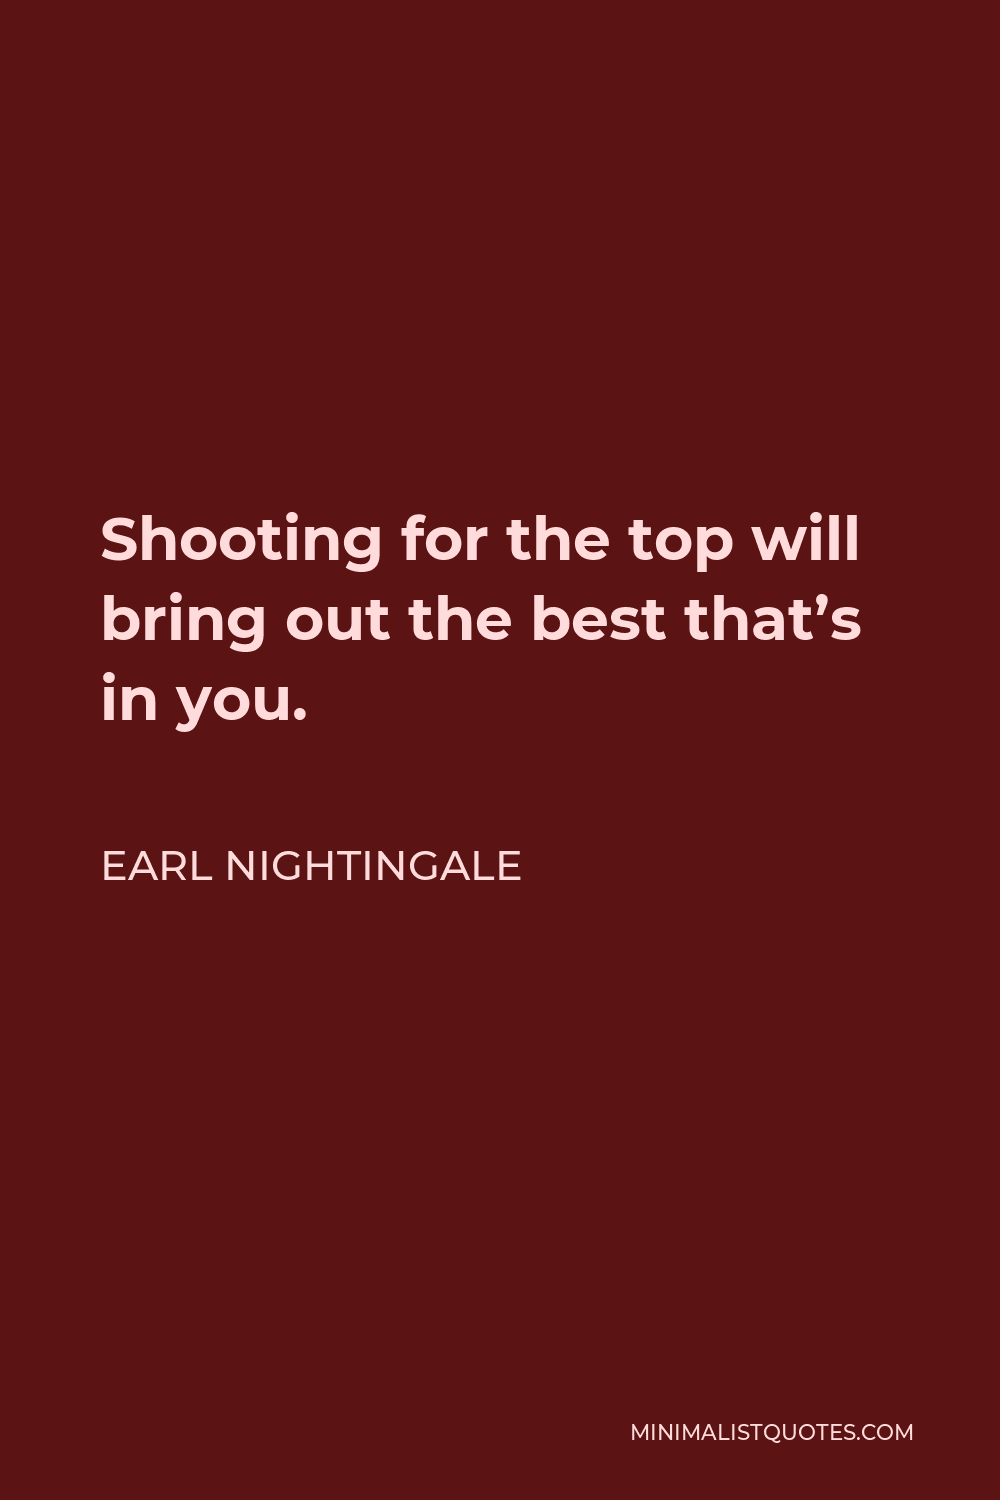 Earl Nightingale Quote - Shooting for the top will bring out the best that’s in you.